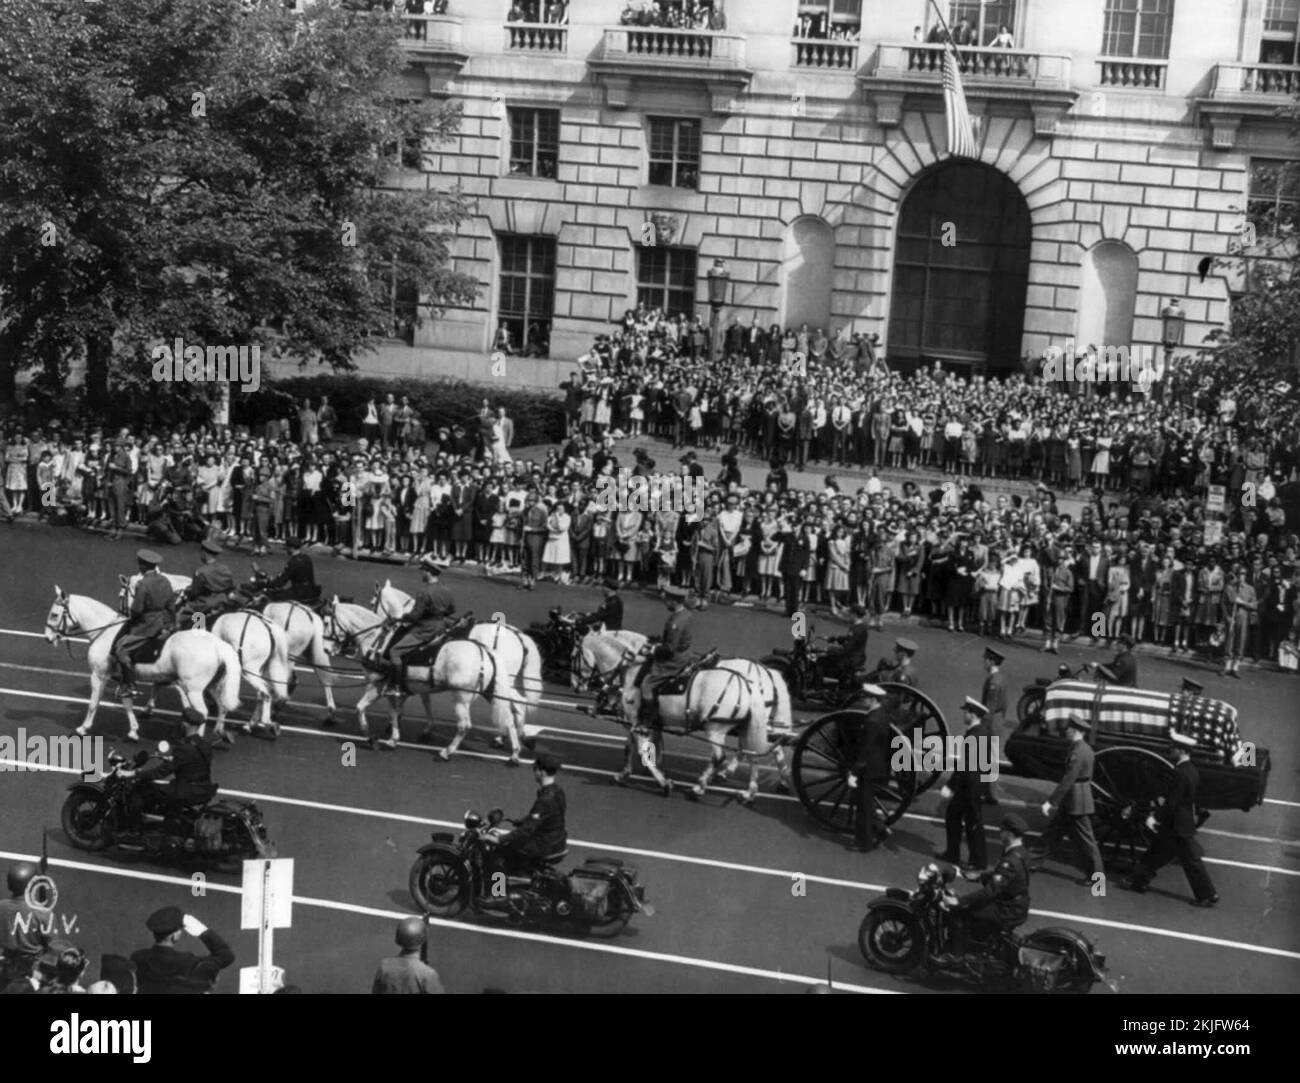 President Franklin Roosevelt's funeral procession in Washington, D.C., watched by 300,000 spectators (April 14, 1945) Stock Photo